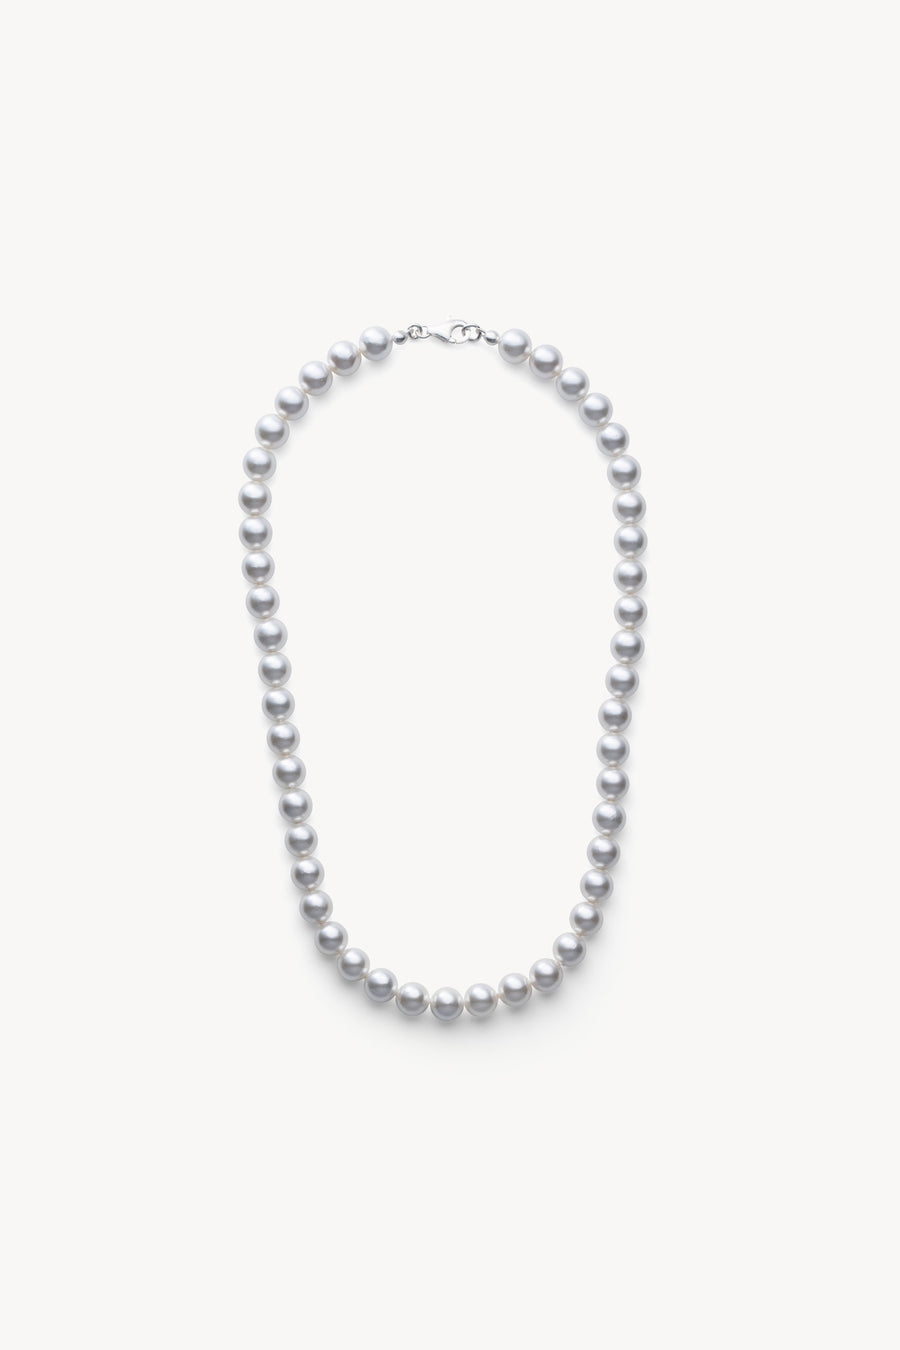 Shell pearl necklace 8mm